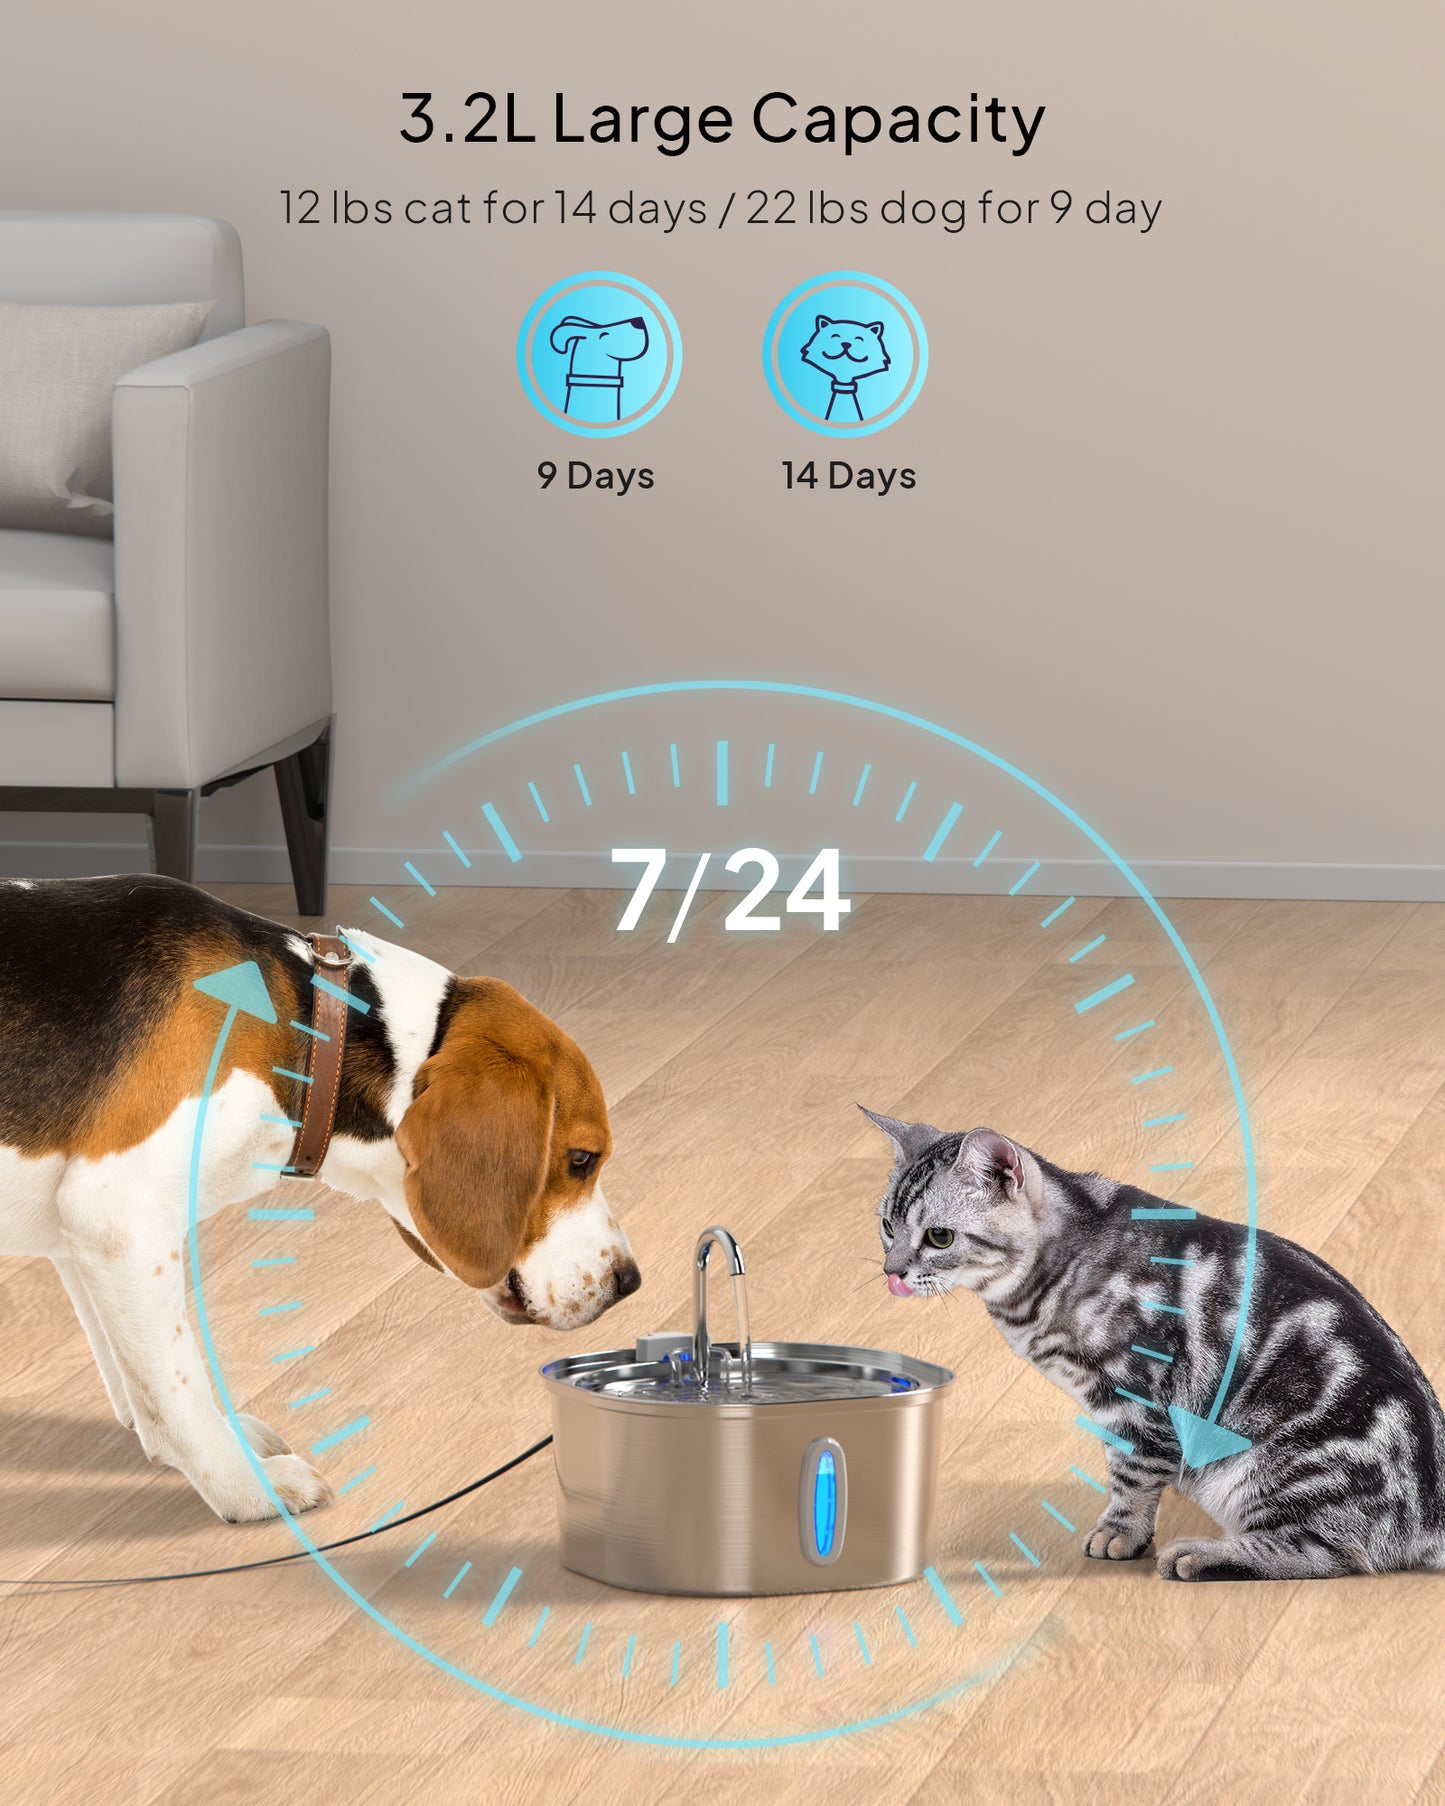 PEKTACO Cat Water Fountain - 3.2L/108oz Stainless Steel Pet Water Fountain Dog Water Dispenser Automatic Cat Fountain with Water Level Window for Cats Inside